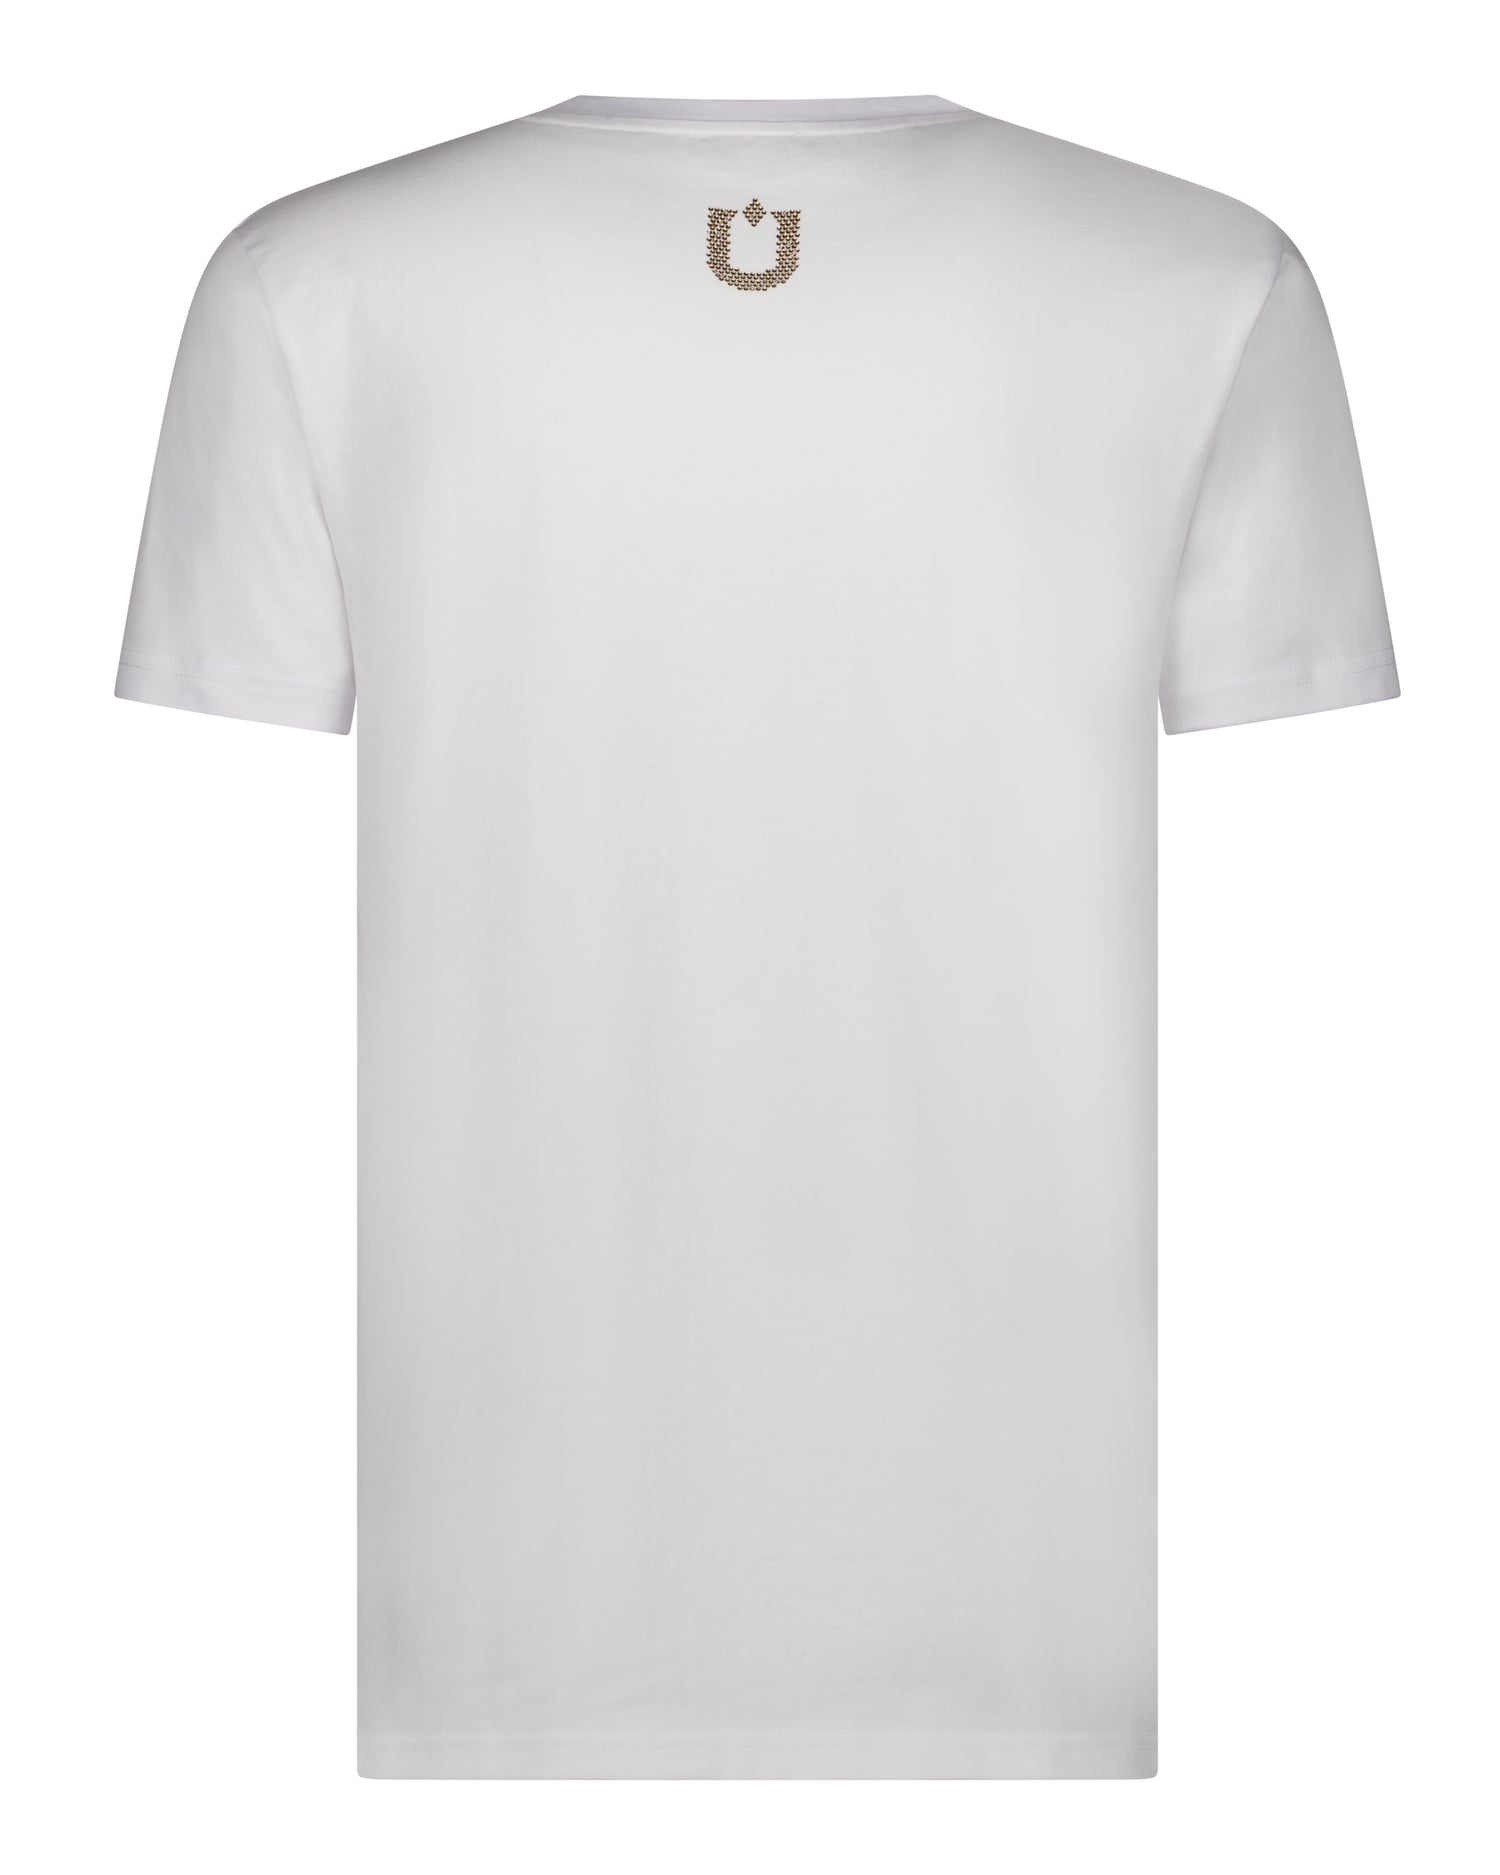 Fine Cotton T-shirt with Crystal Claw Embellishment - White